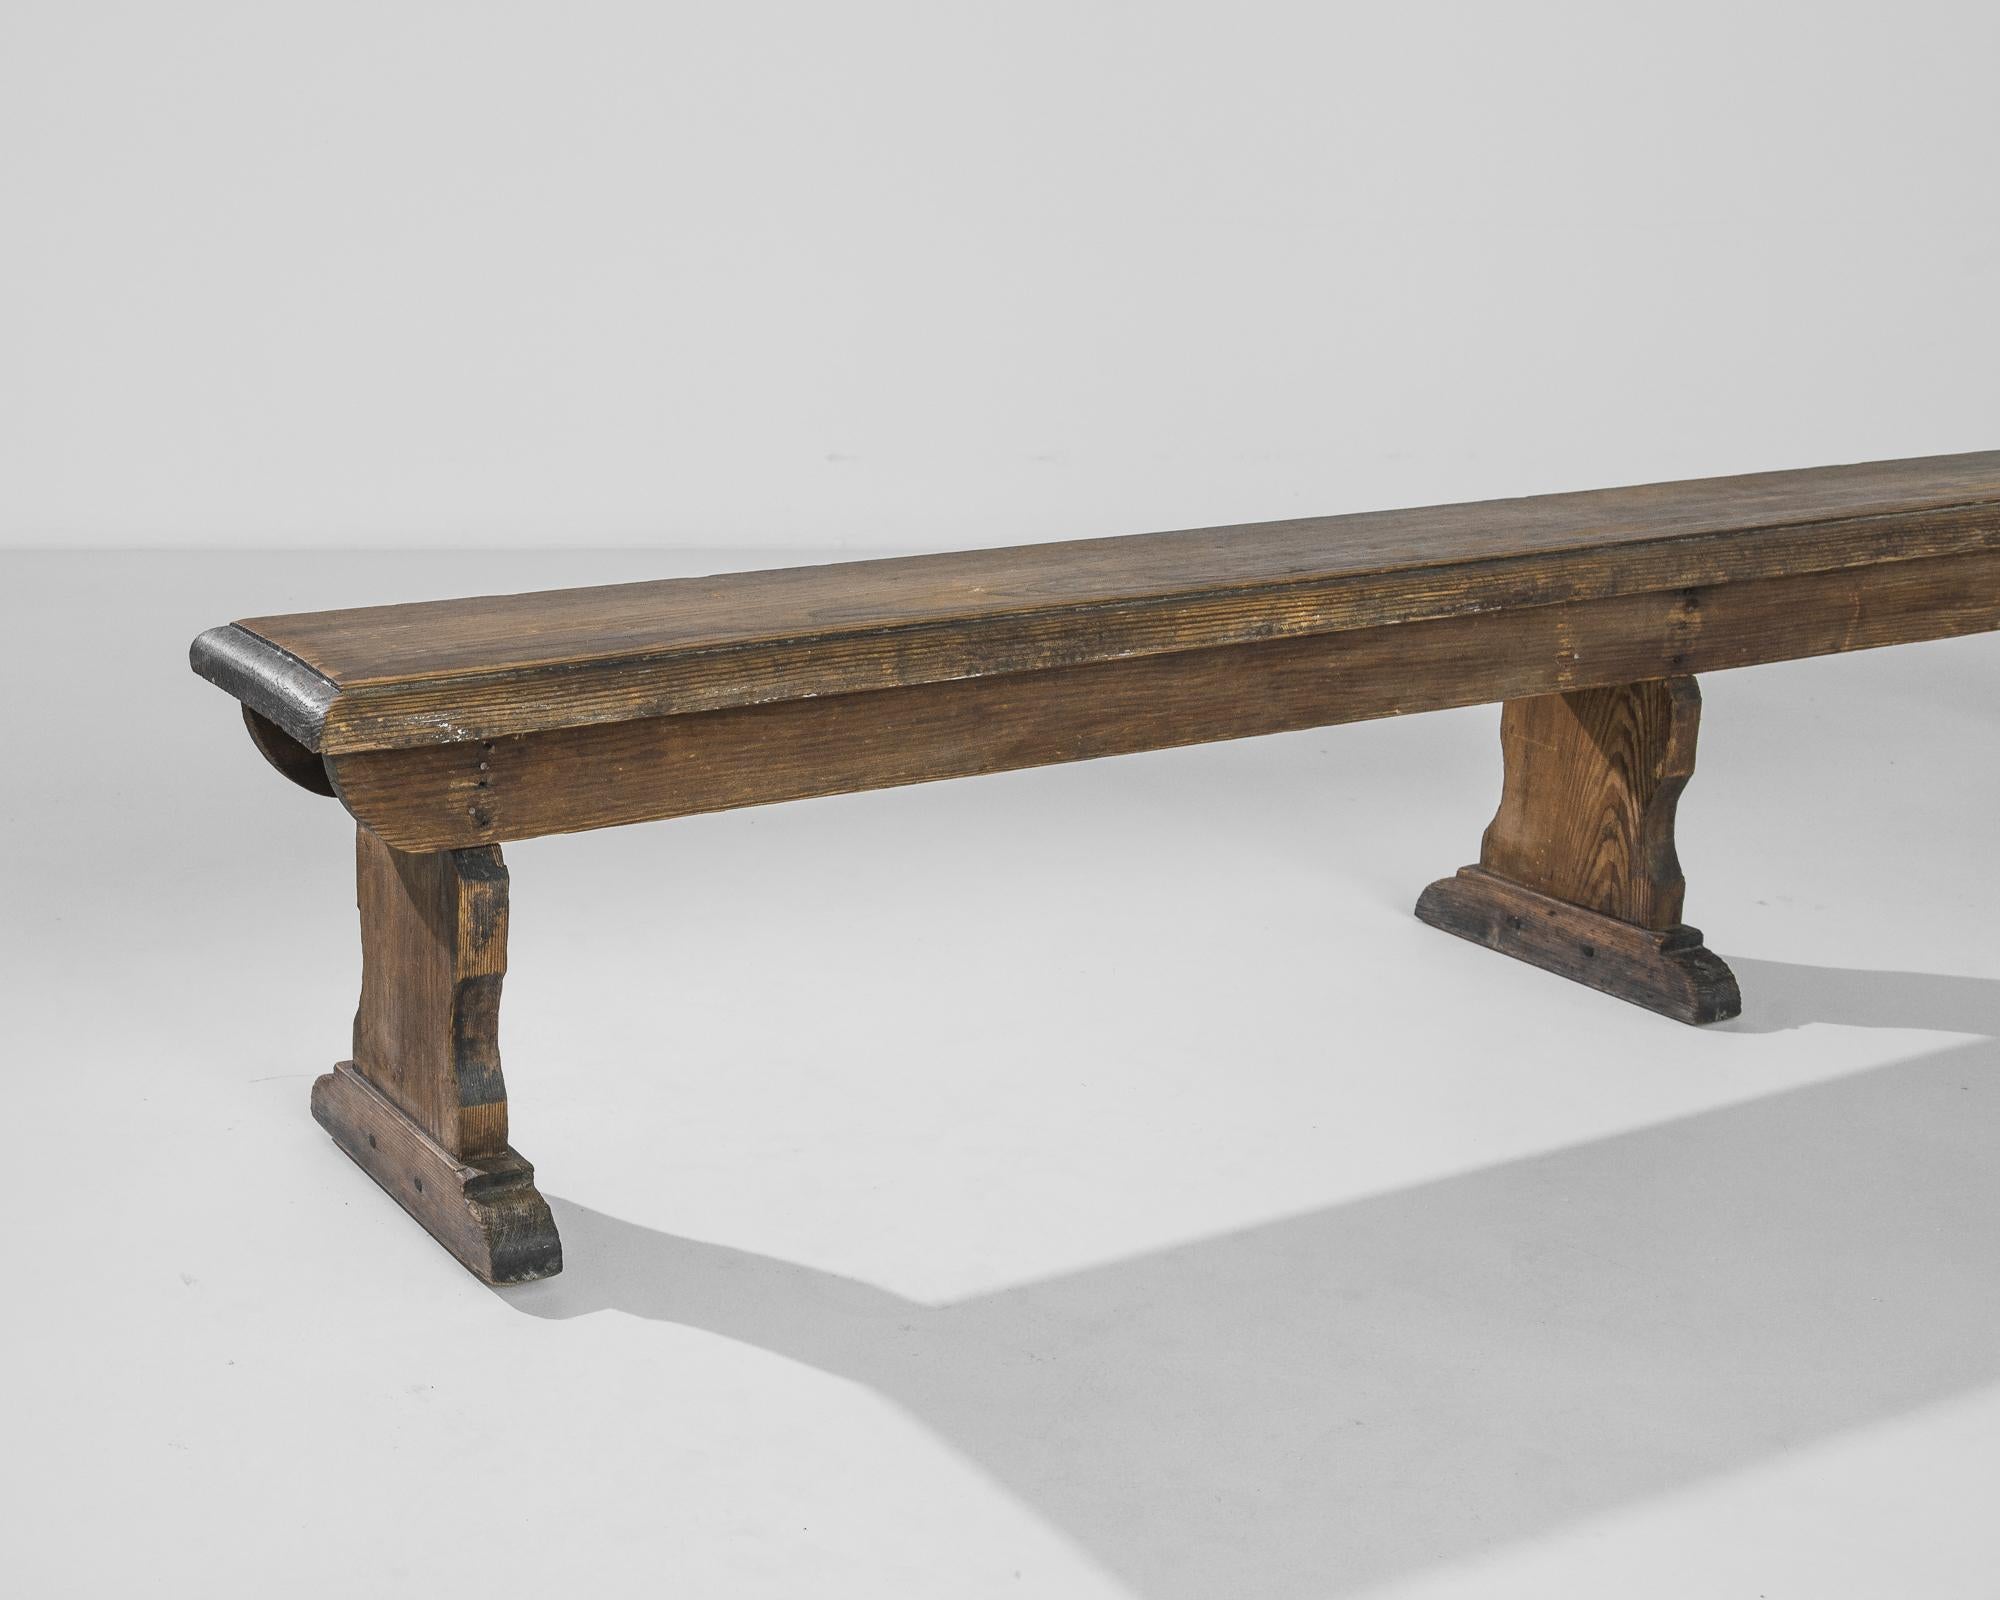 A wooden bench from the turn of the century Belgium. A long, slender bench sits atop a trio of trestle legs: the simplicity of the shape is reminiscent of a church pew. The deep umber tone of the wood is enhanced by a subtle polish, emphasizing the